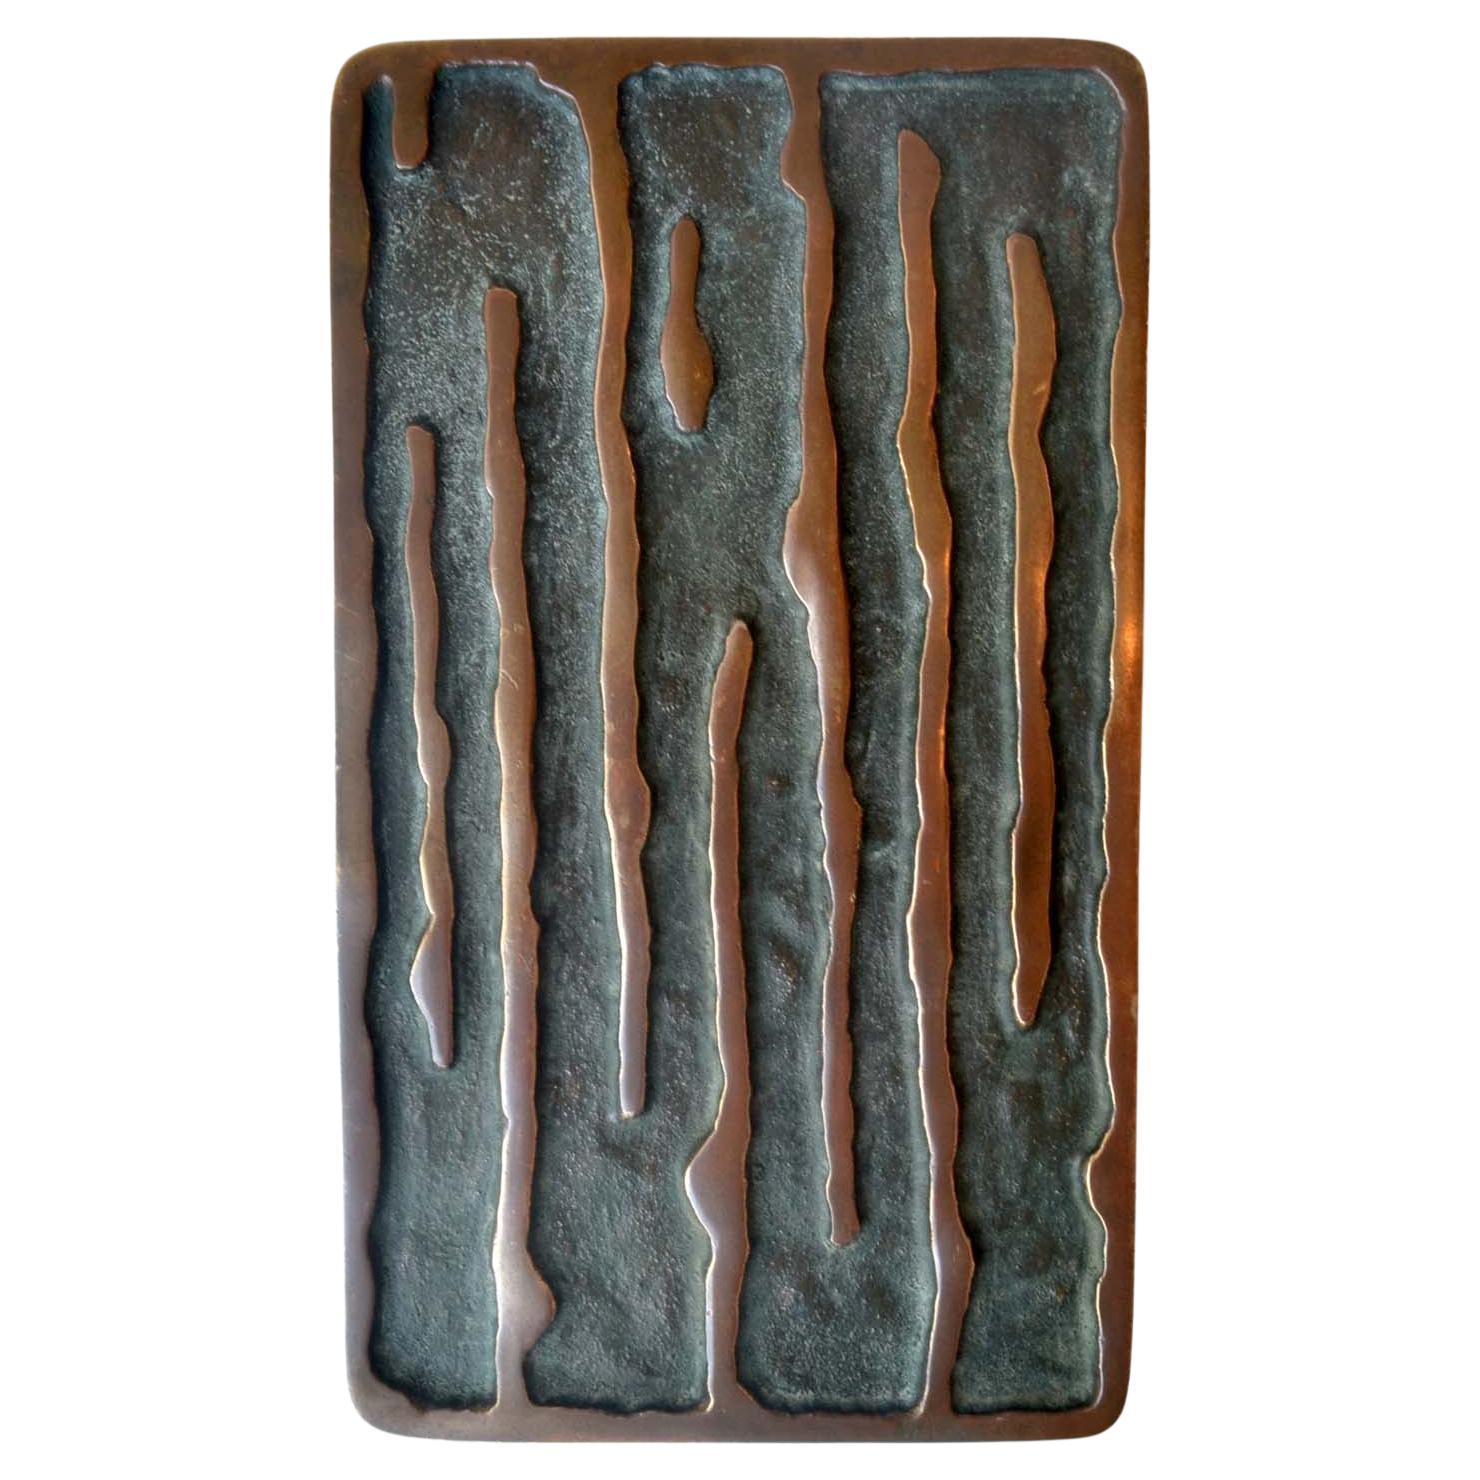 Set of two rectangular bronze door handles with vertical wave relief, European 1970's. Their relief with original patina will give real personality to a house. These identical handles can be applied inside or outside on a pair of double doors next